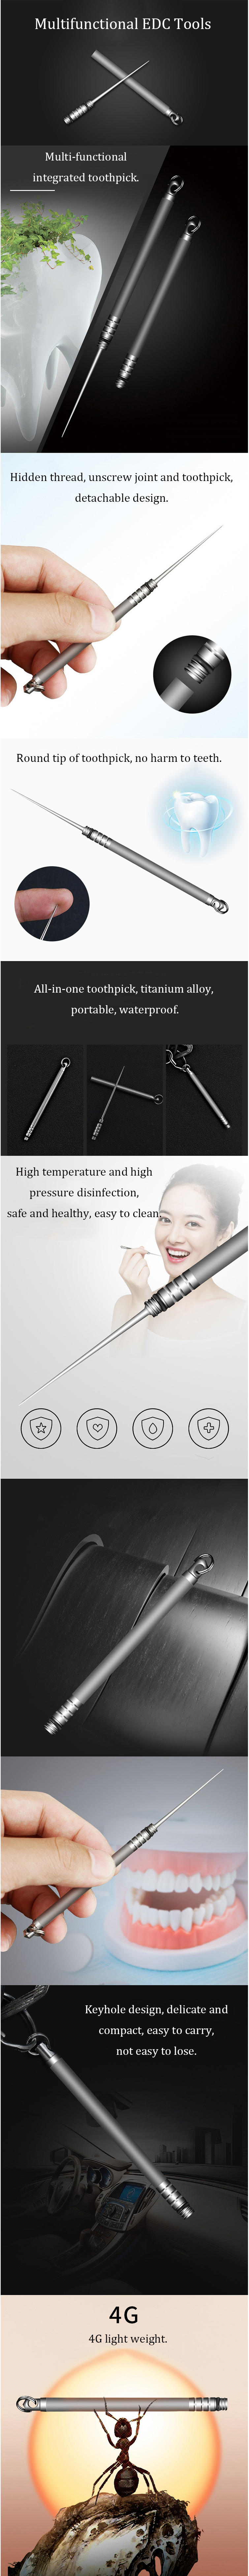 HX-OUTDOORS-EDC-Titanium-Alloy-Integrated-Toothpick-From-Outdoor-Portable-Waterproof-Sealing-Multifu-1621993-1